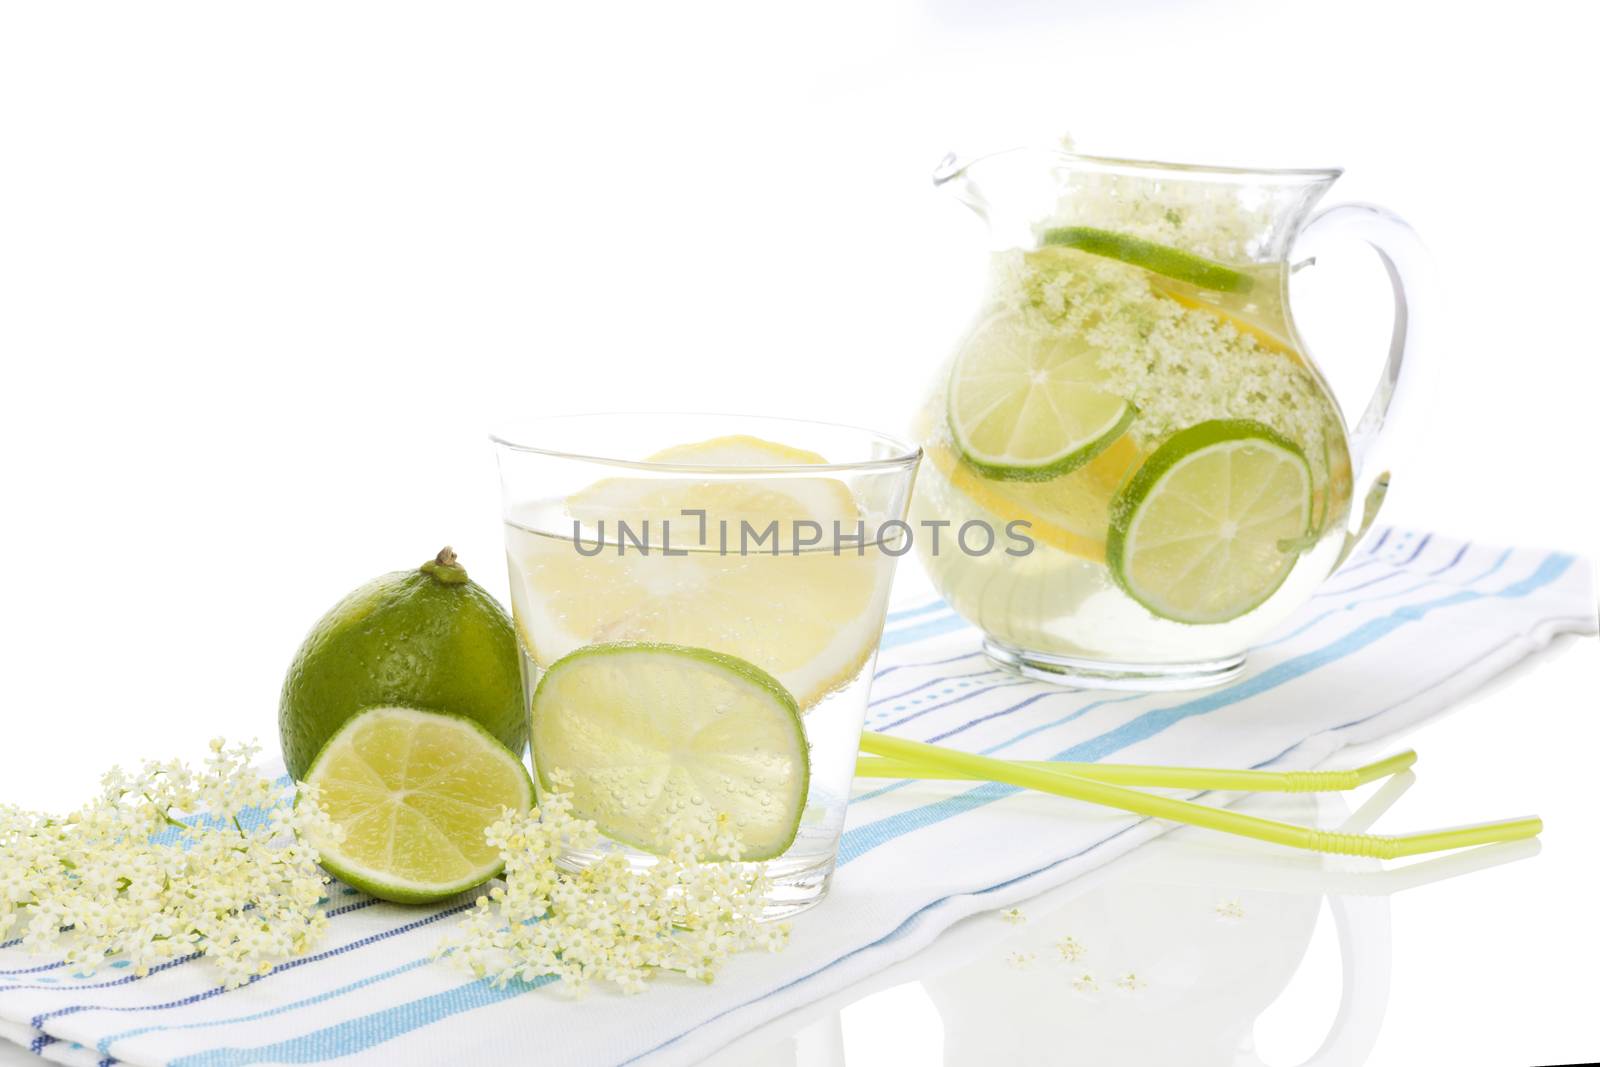 Healthy homemade organic elderberry lemonade with lime slices isolated on white background. Refreshing seasonal nonalcoholic summer drink.